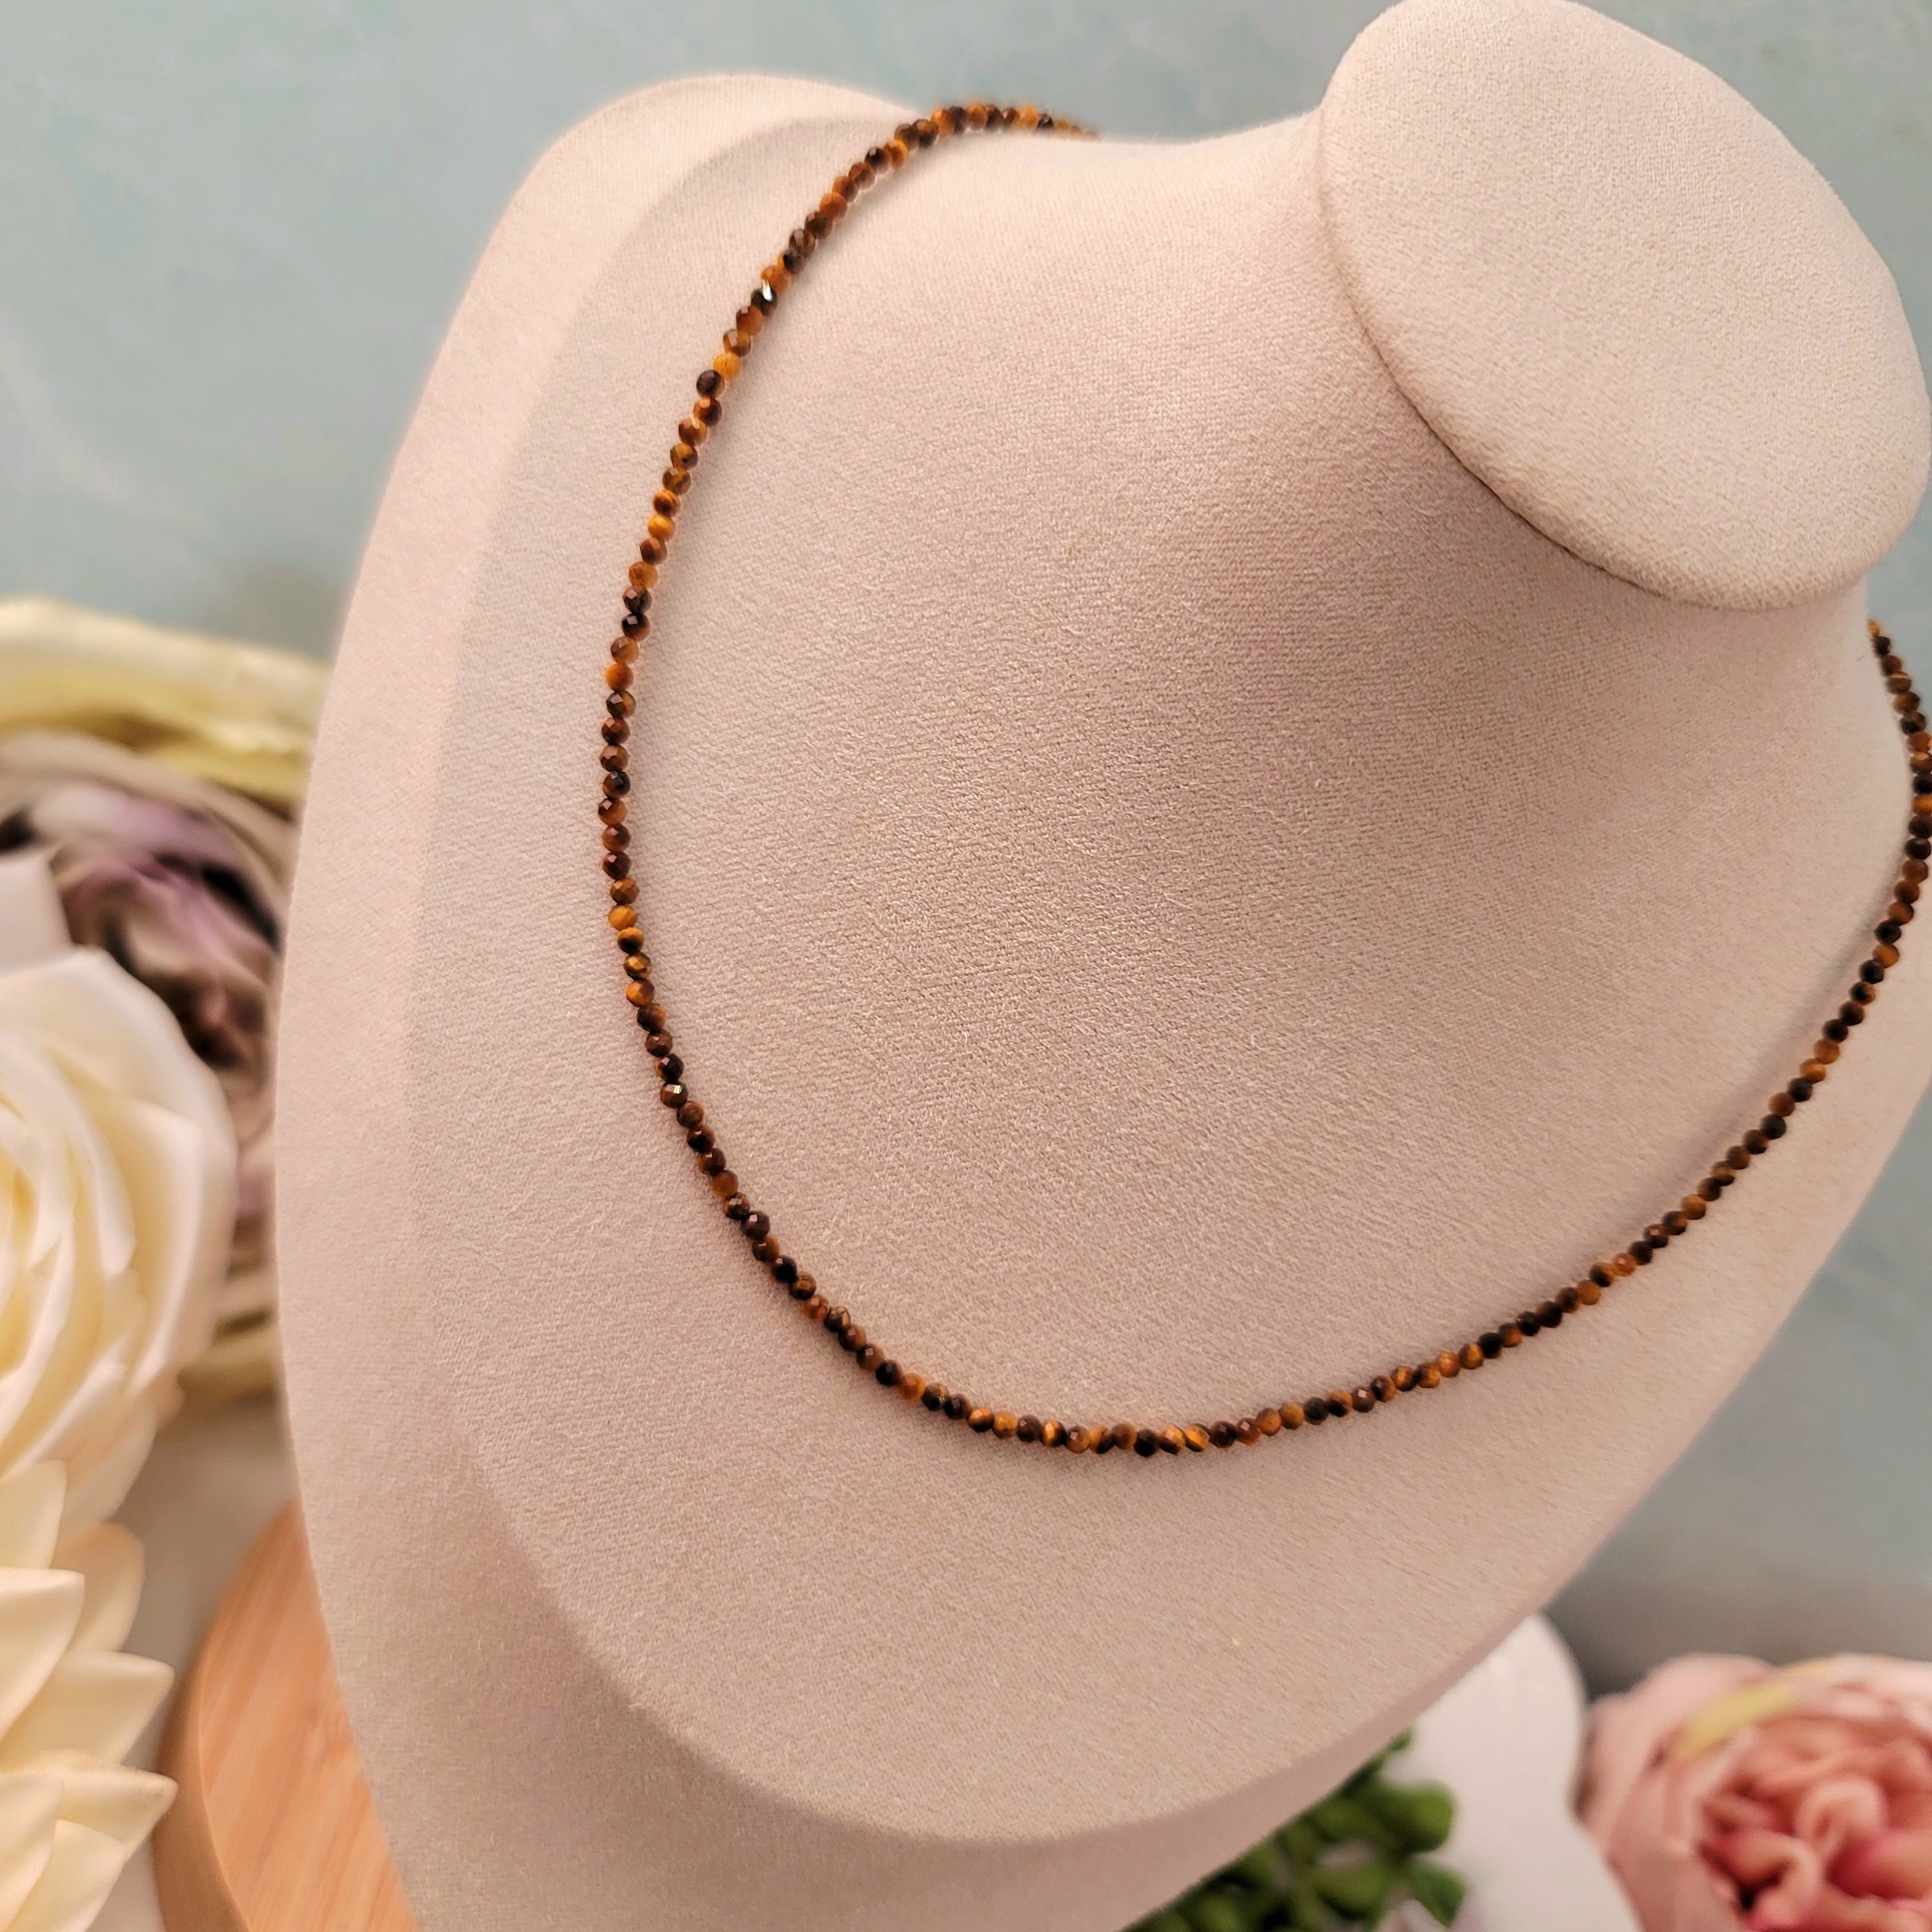 Tiger Eye Micro Faceted Choker/Layering Necklace for Grounding and Finding your Center